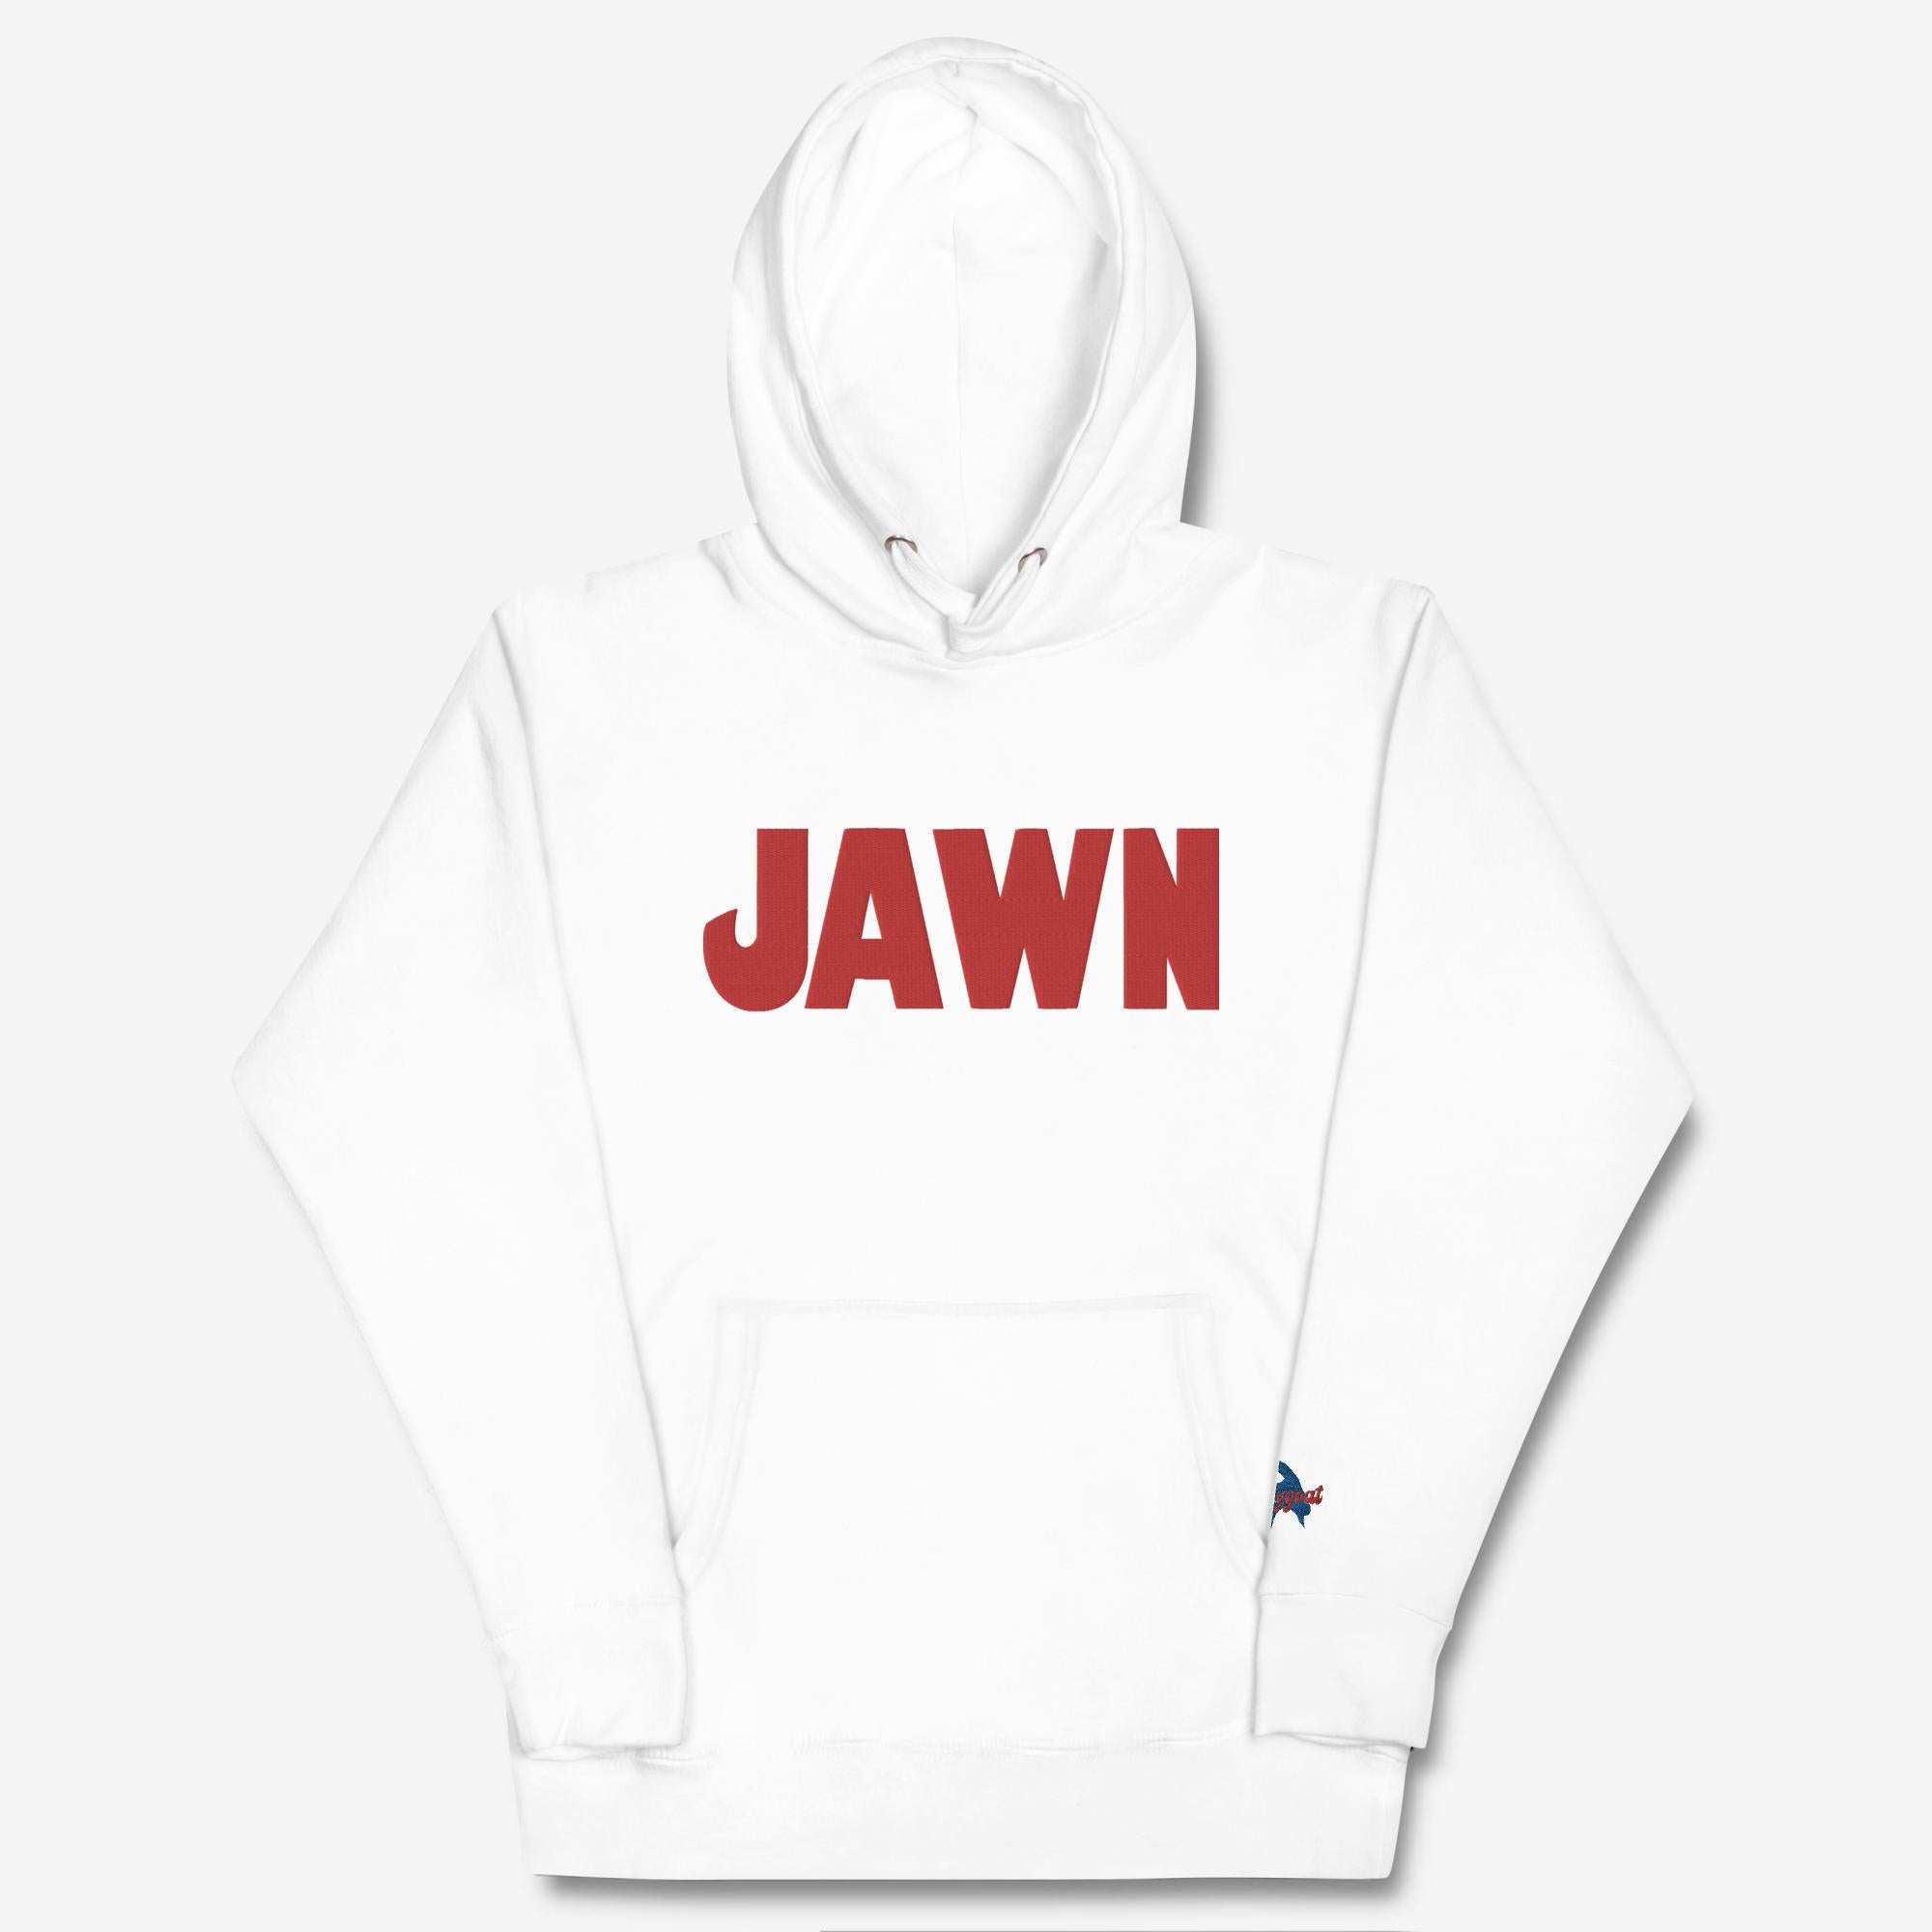 "Jaws Jawn" Embroidered Hoodie